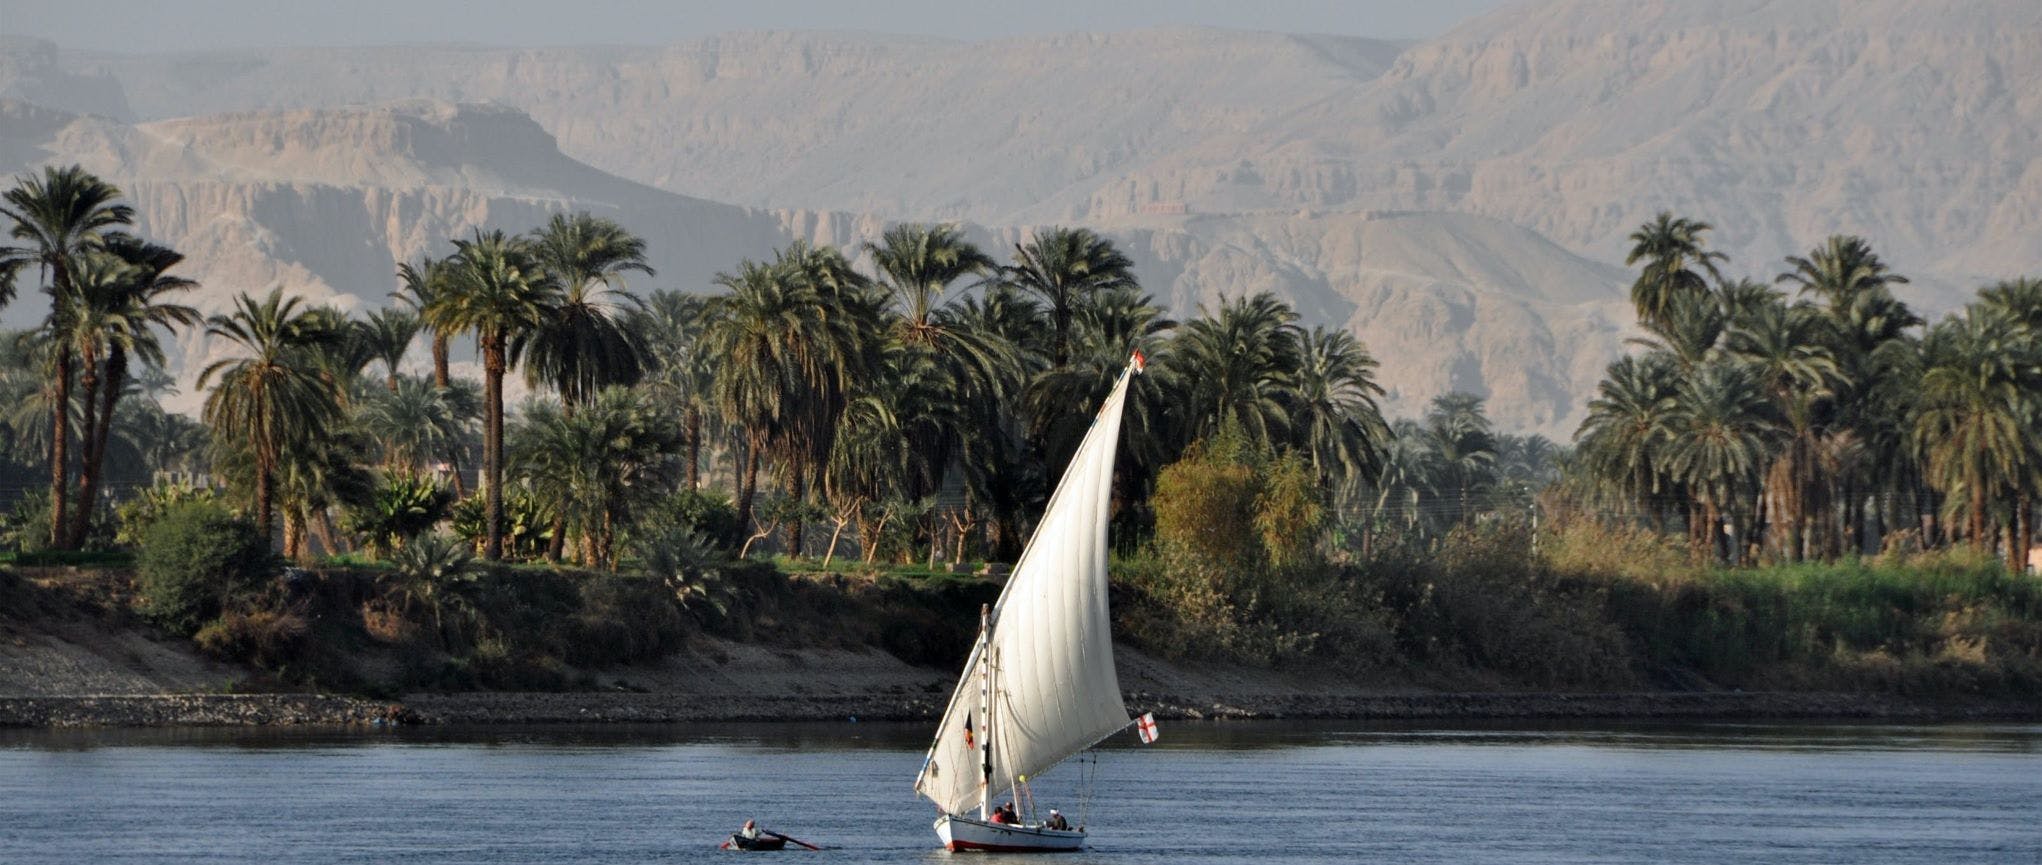 Sunset Banana Island Nile experience onboard a felucca from Luxor Musement